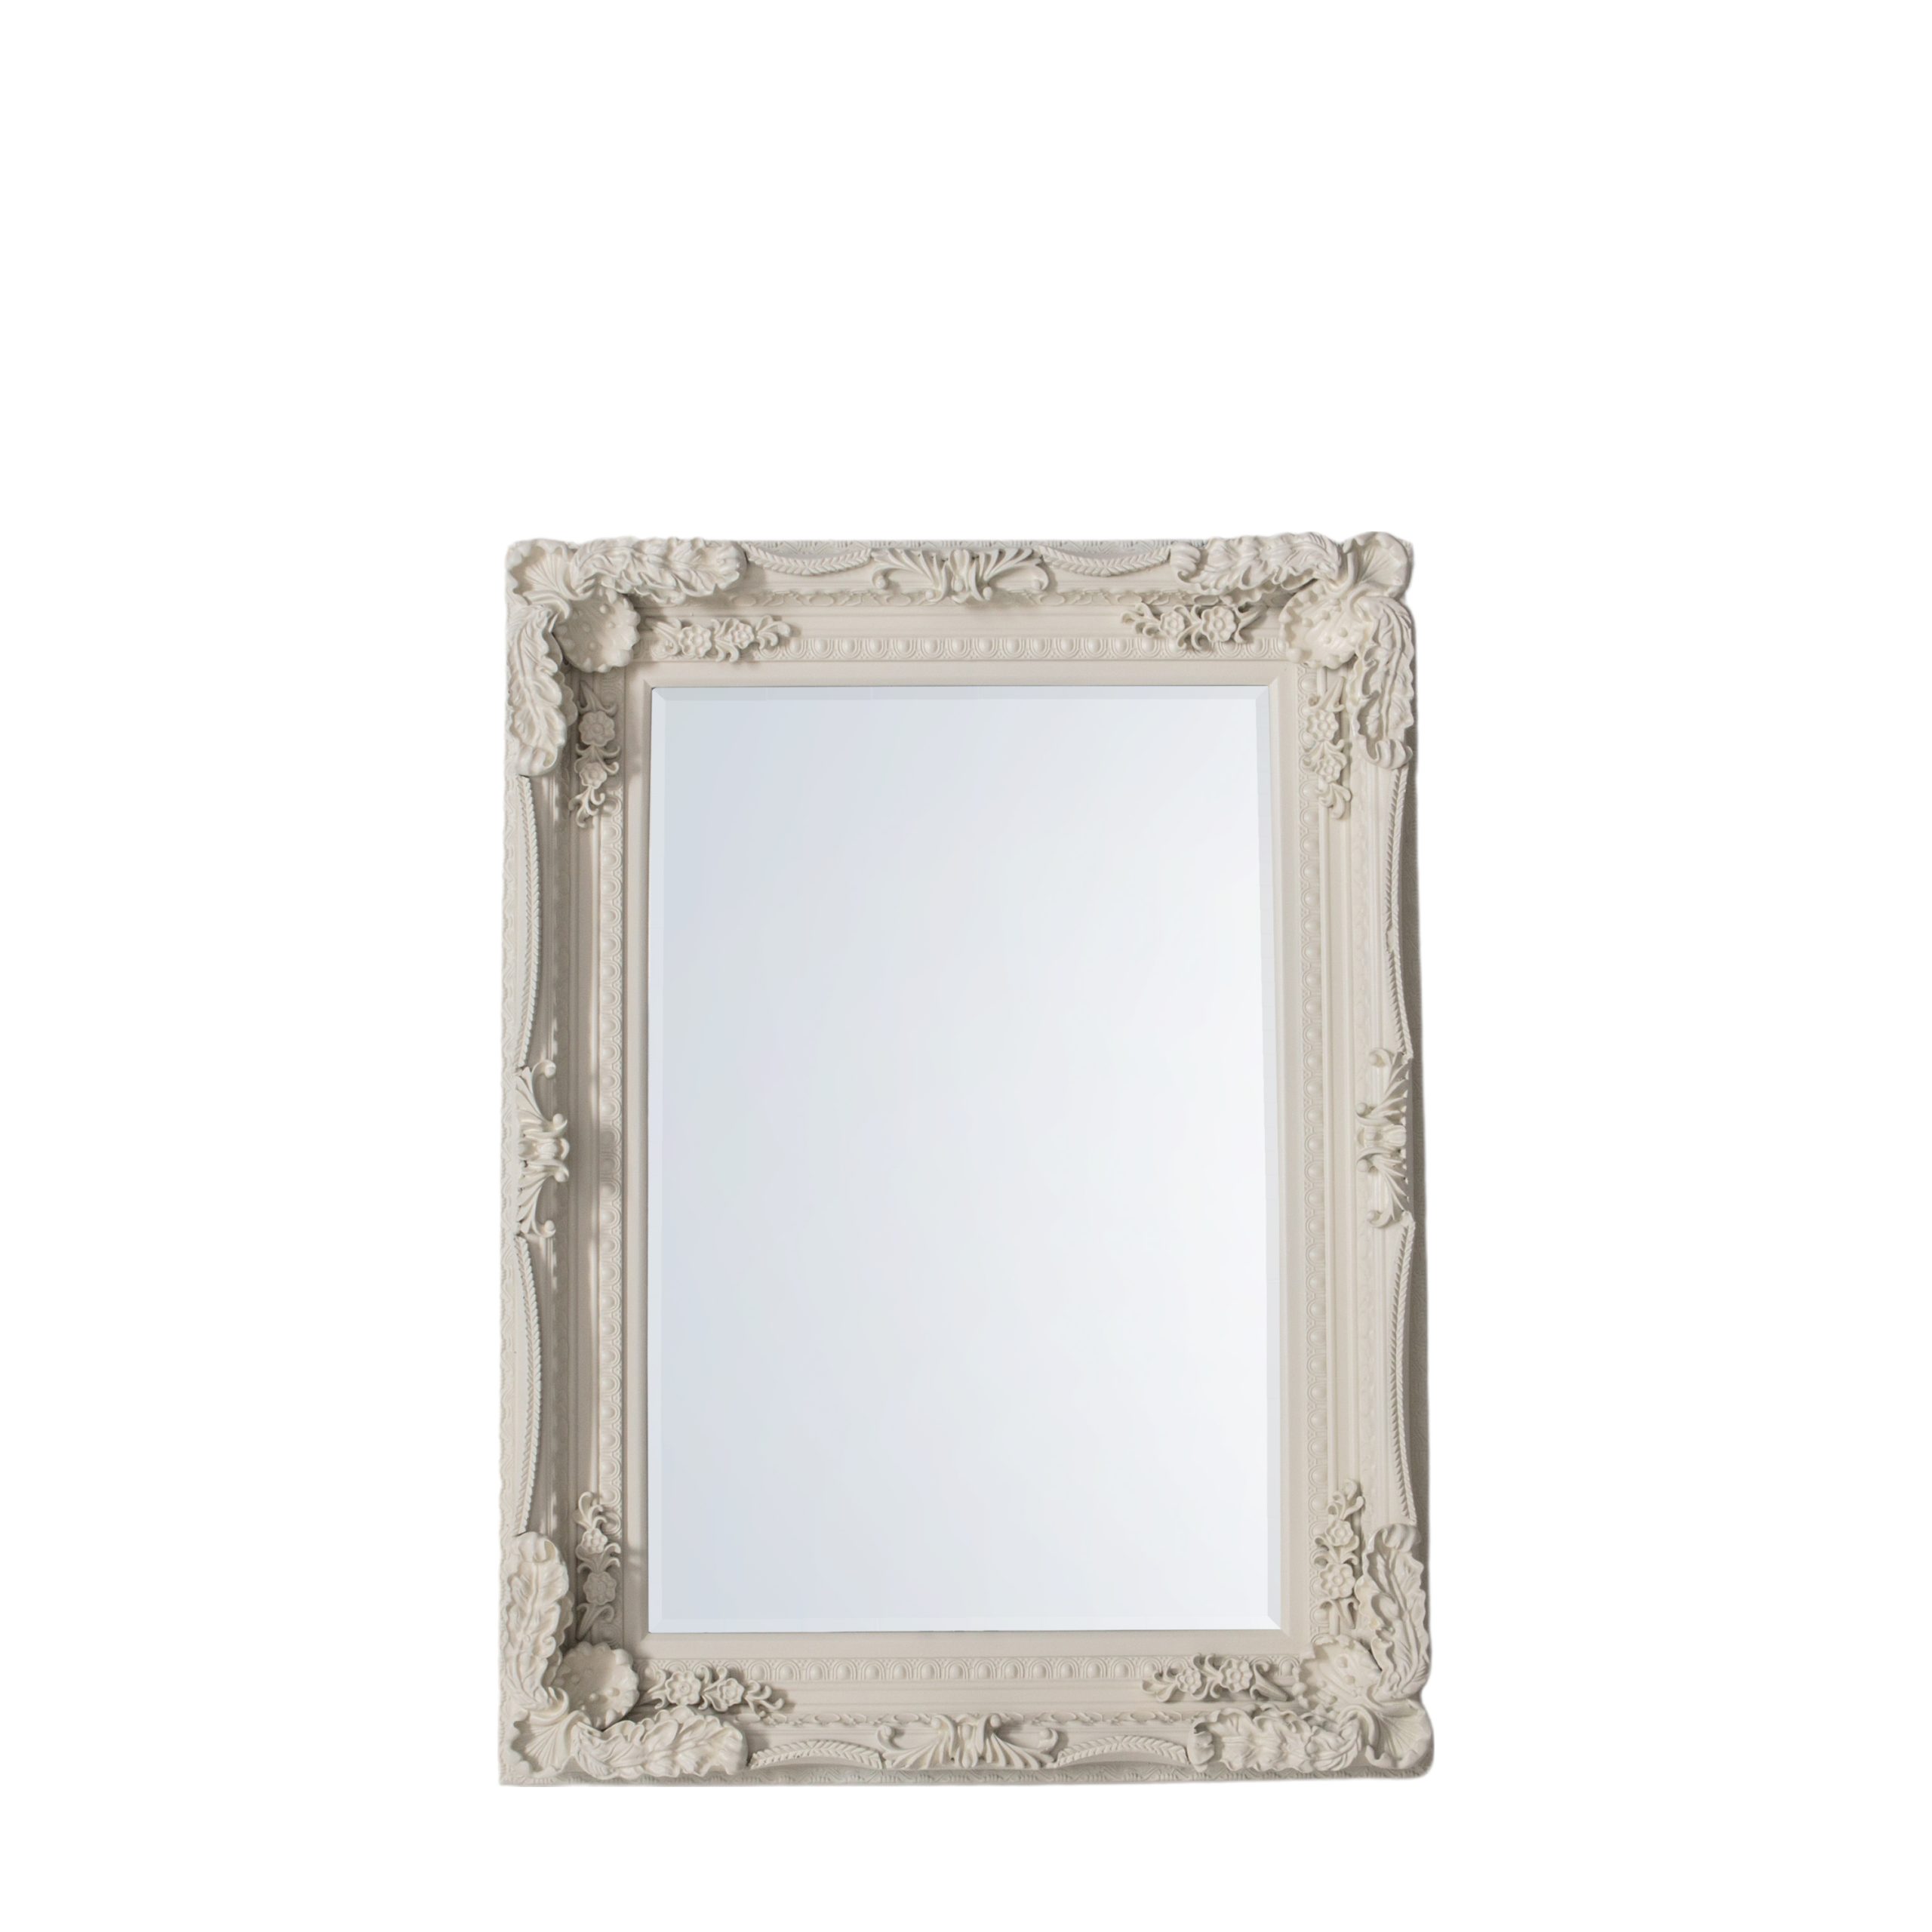 Gallery Direct Carved Louis Mirror Cream